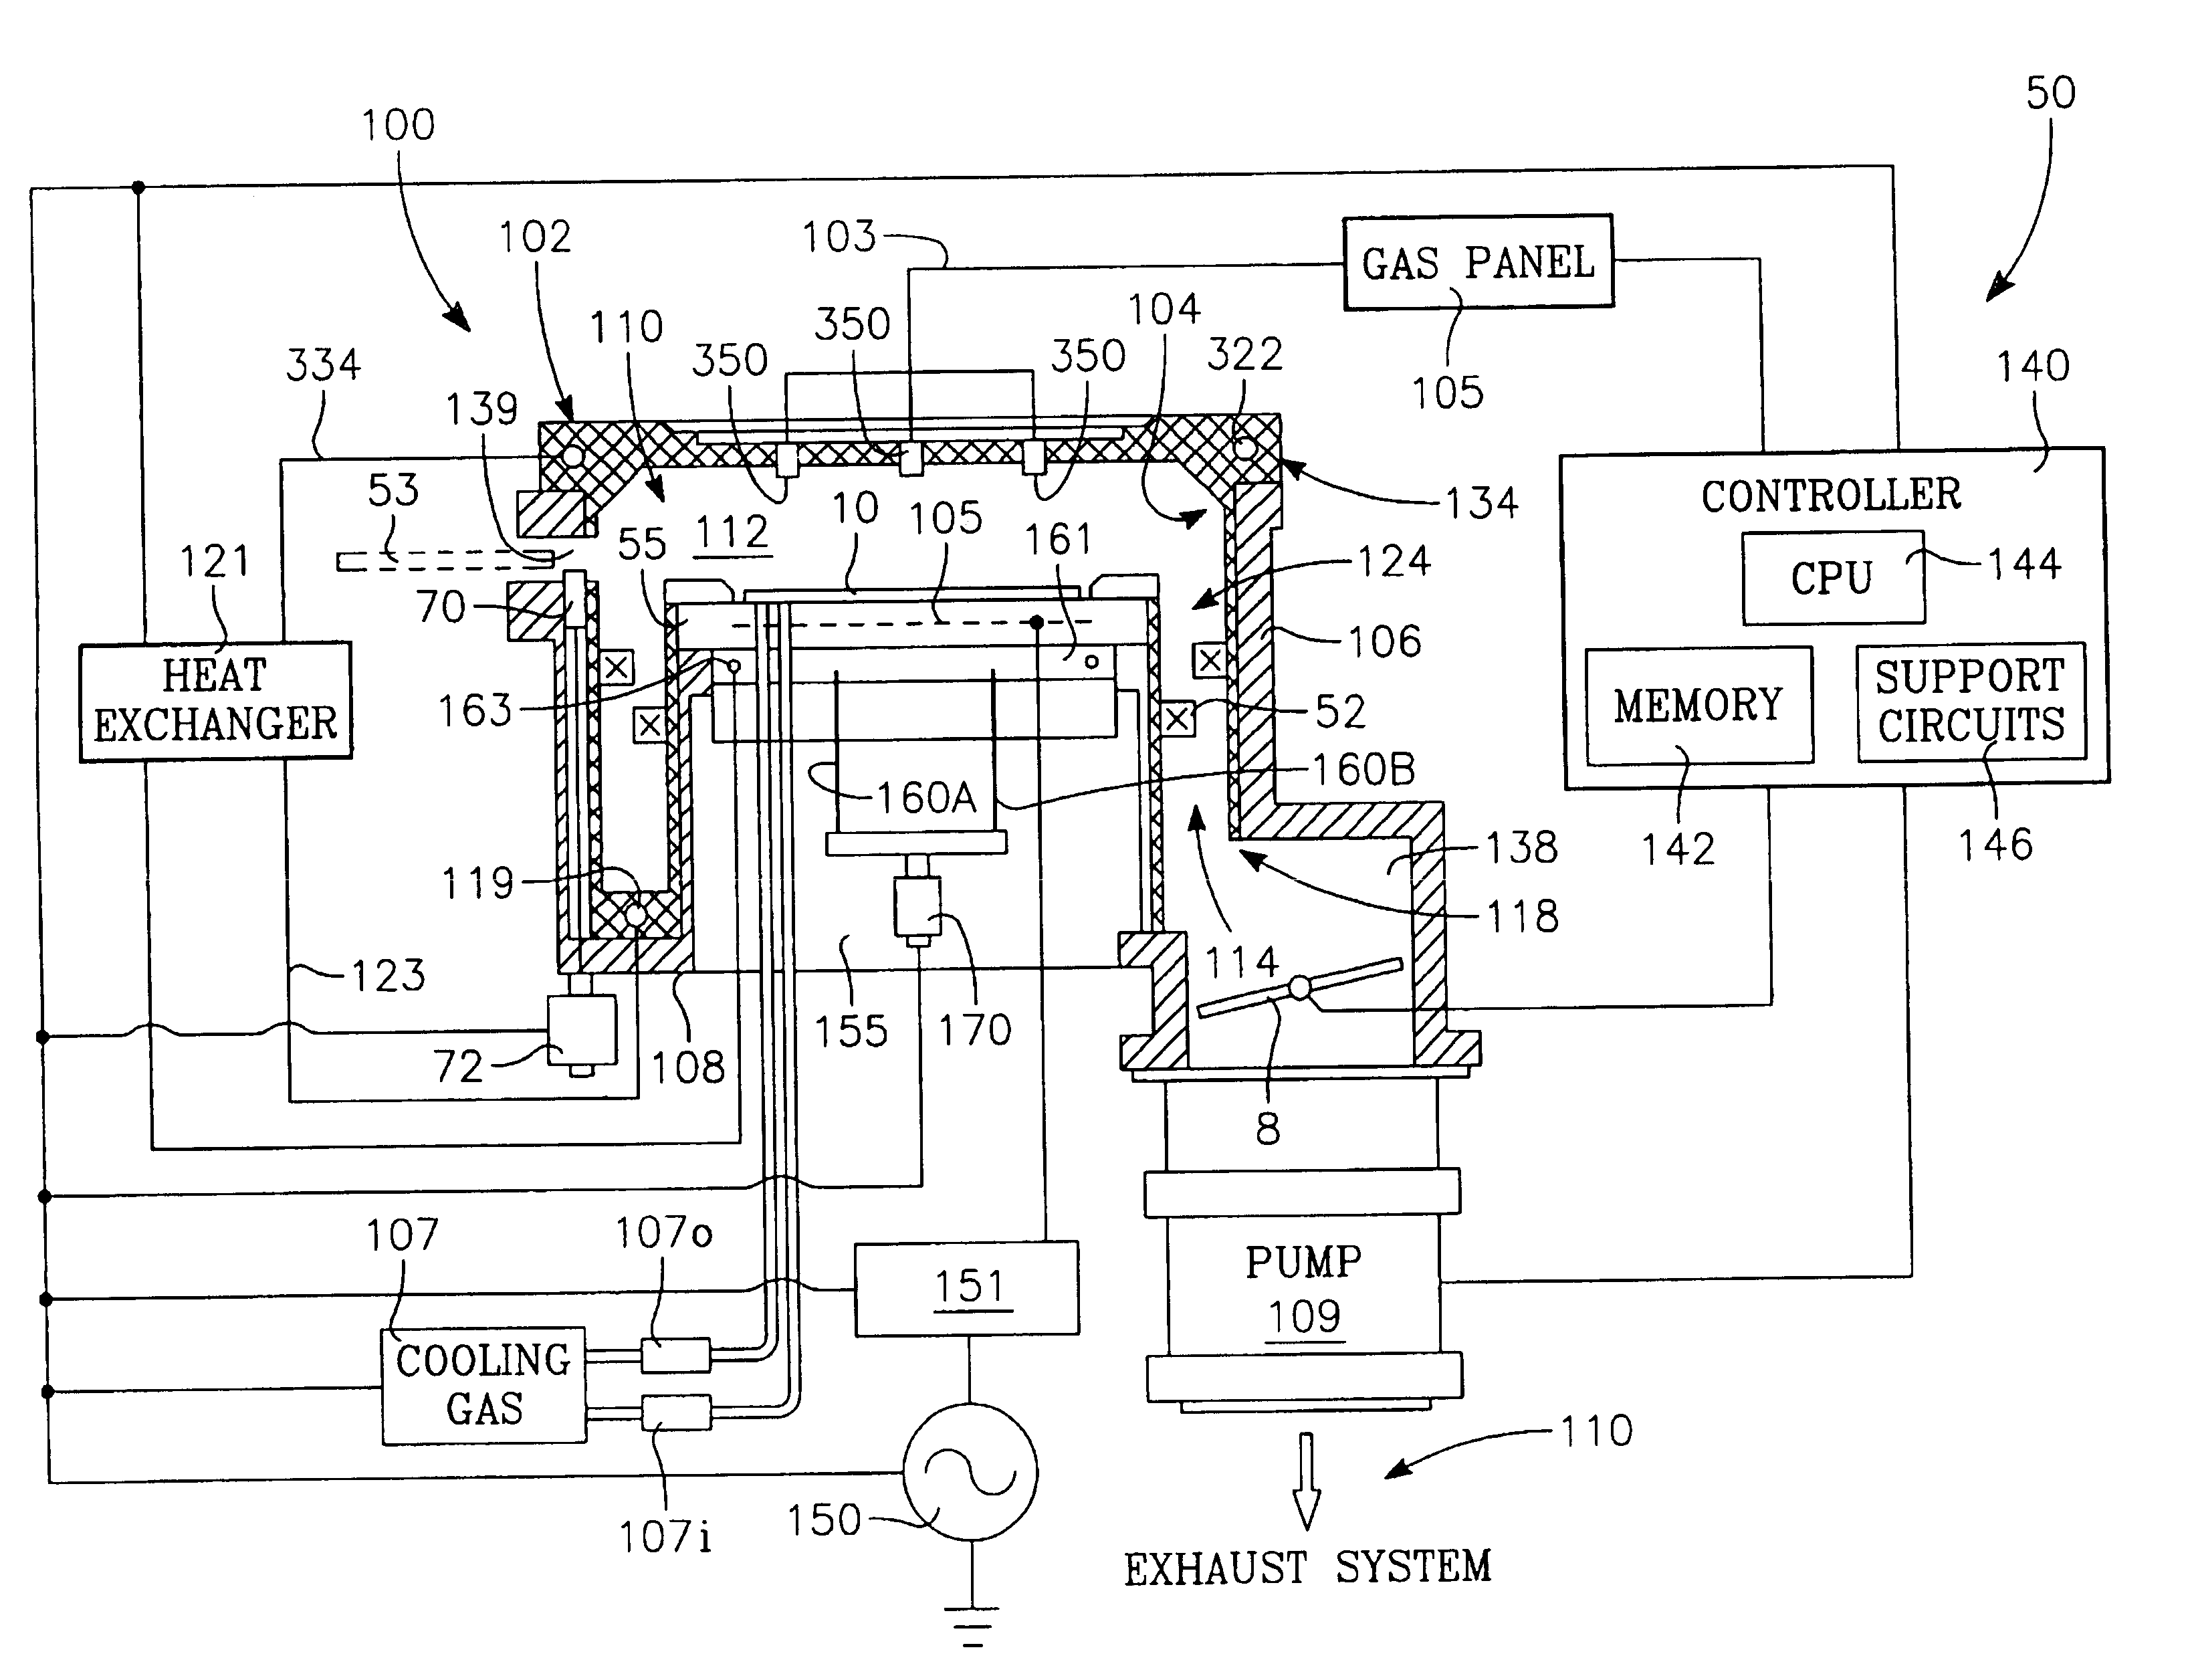 Dielectric etch chamber with expanded process window